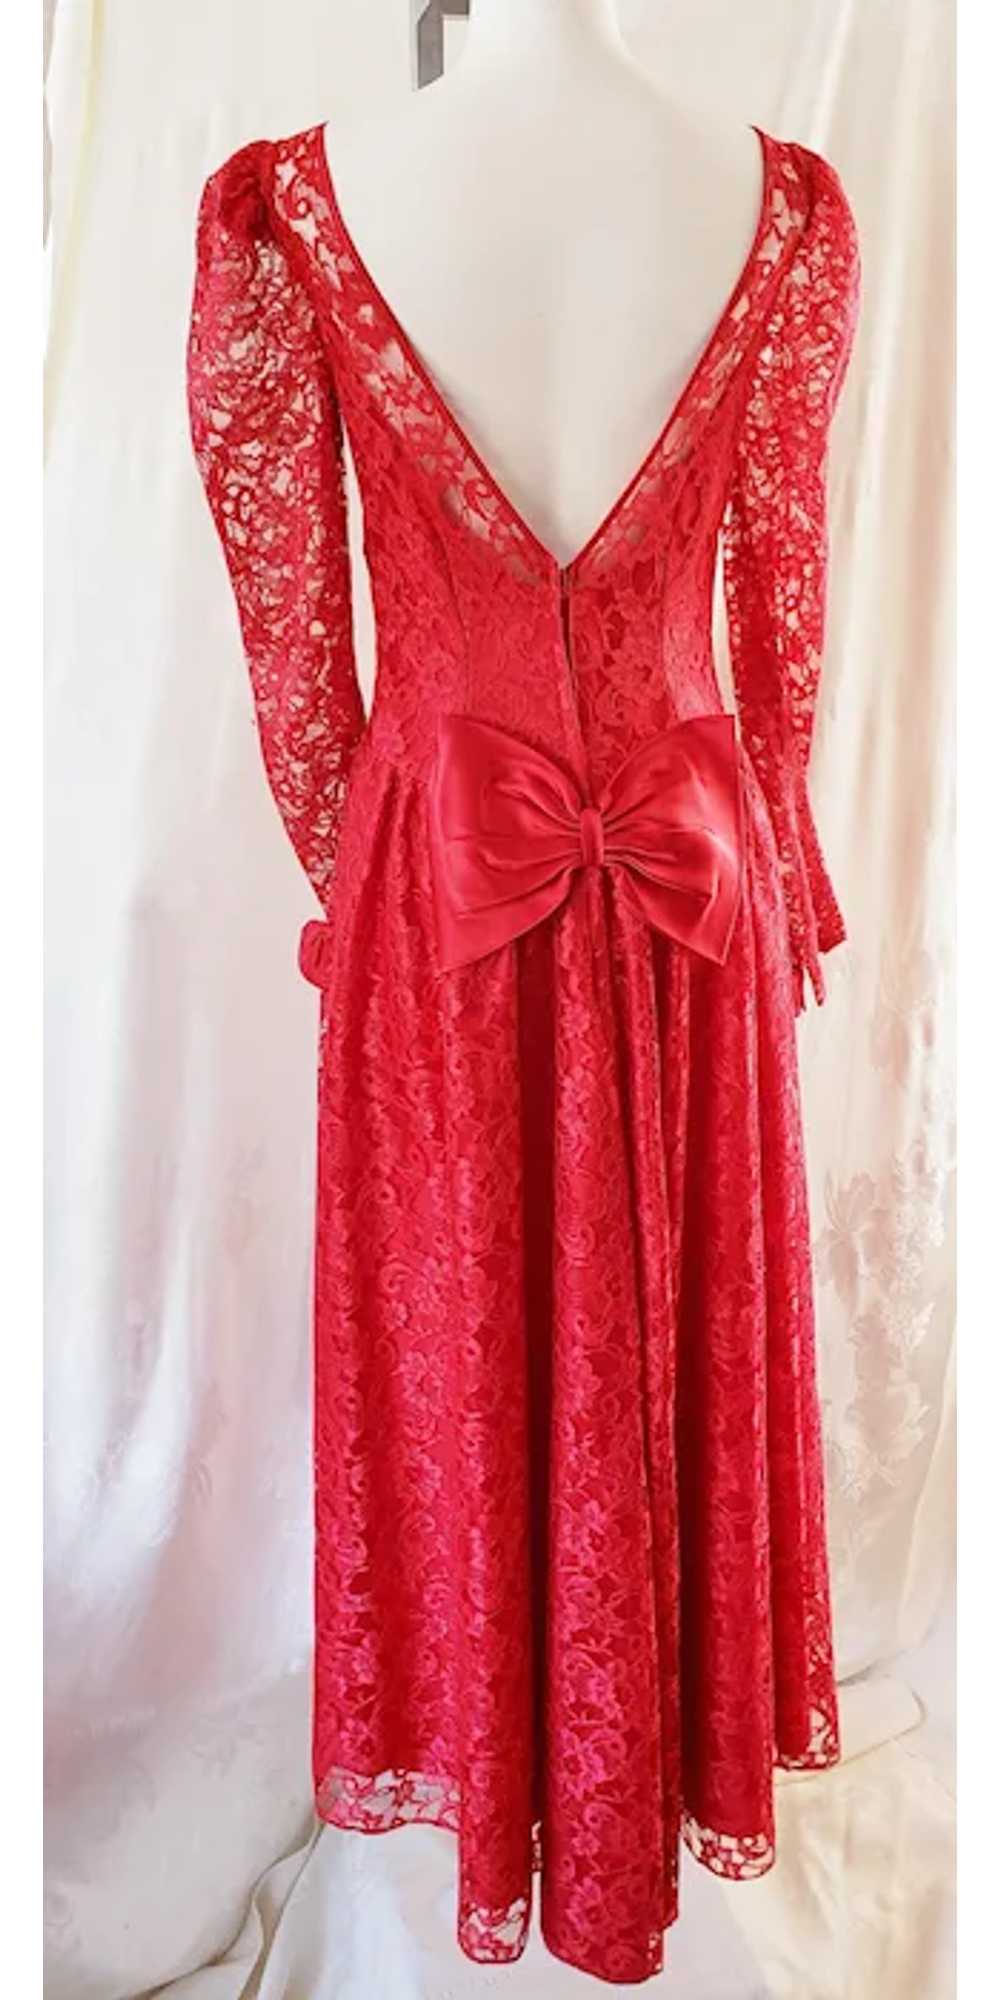 Red Lace Dreamy Gown - image 8